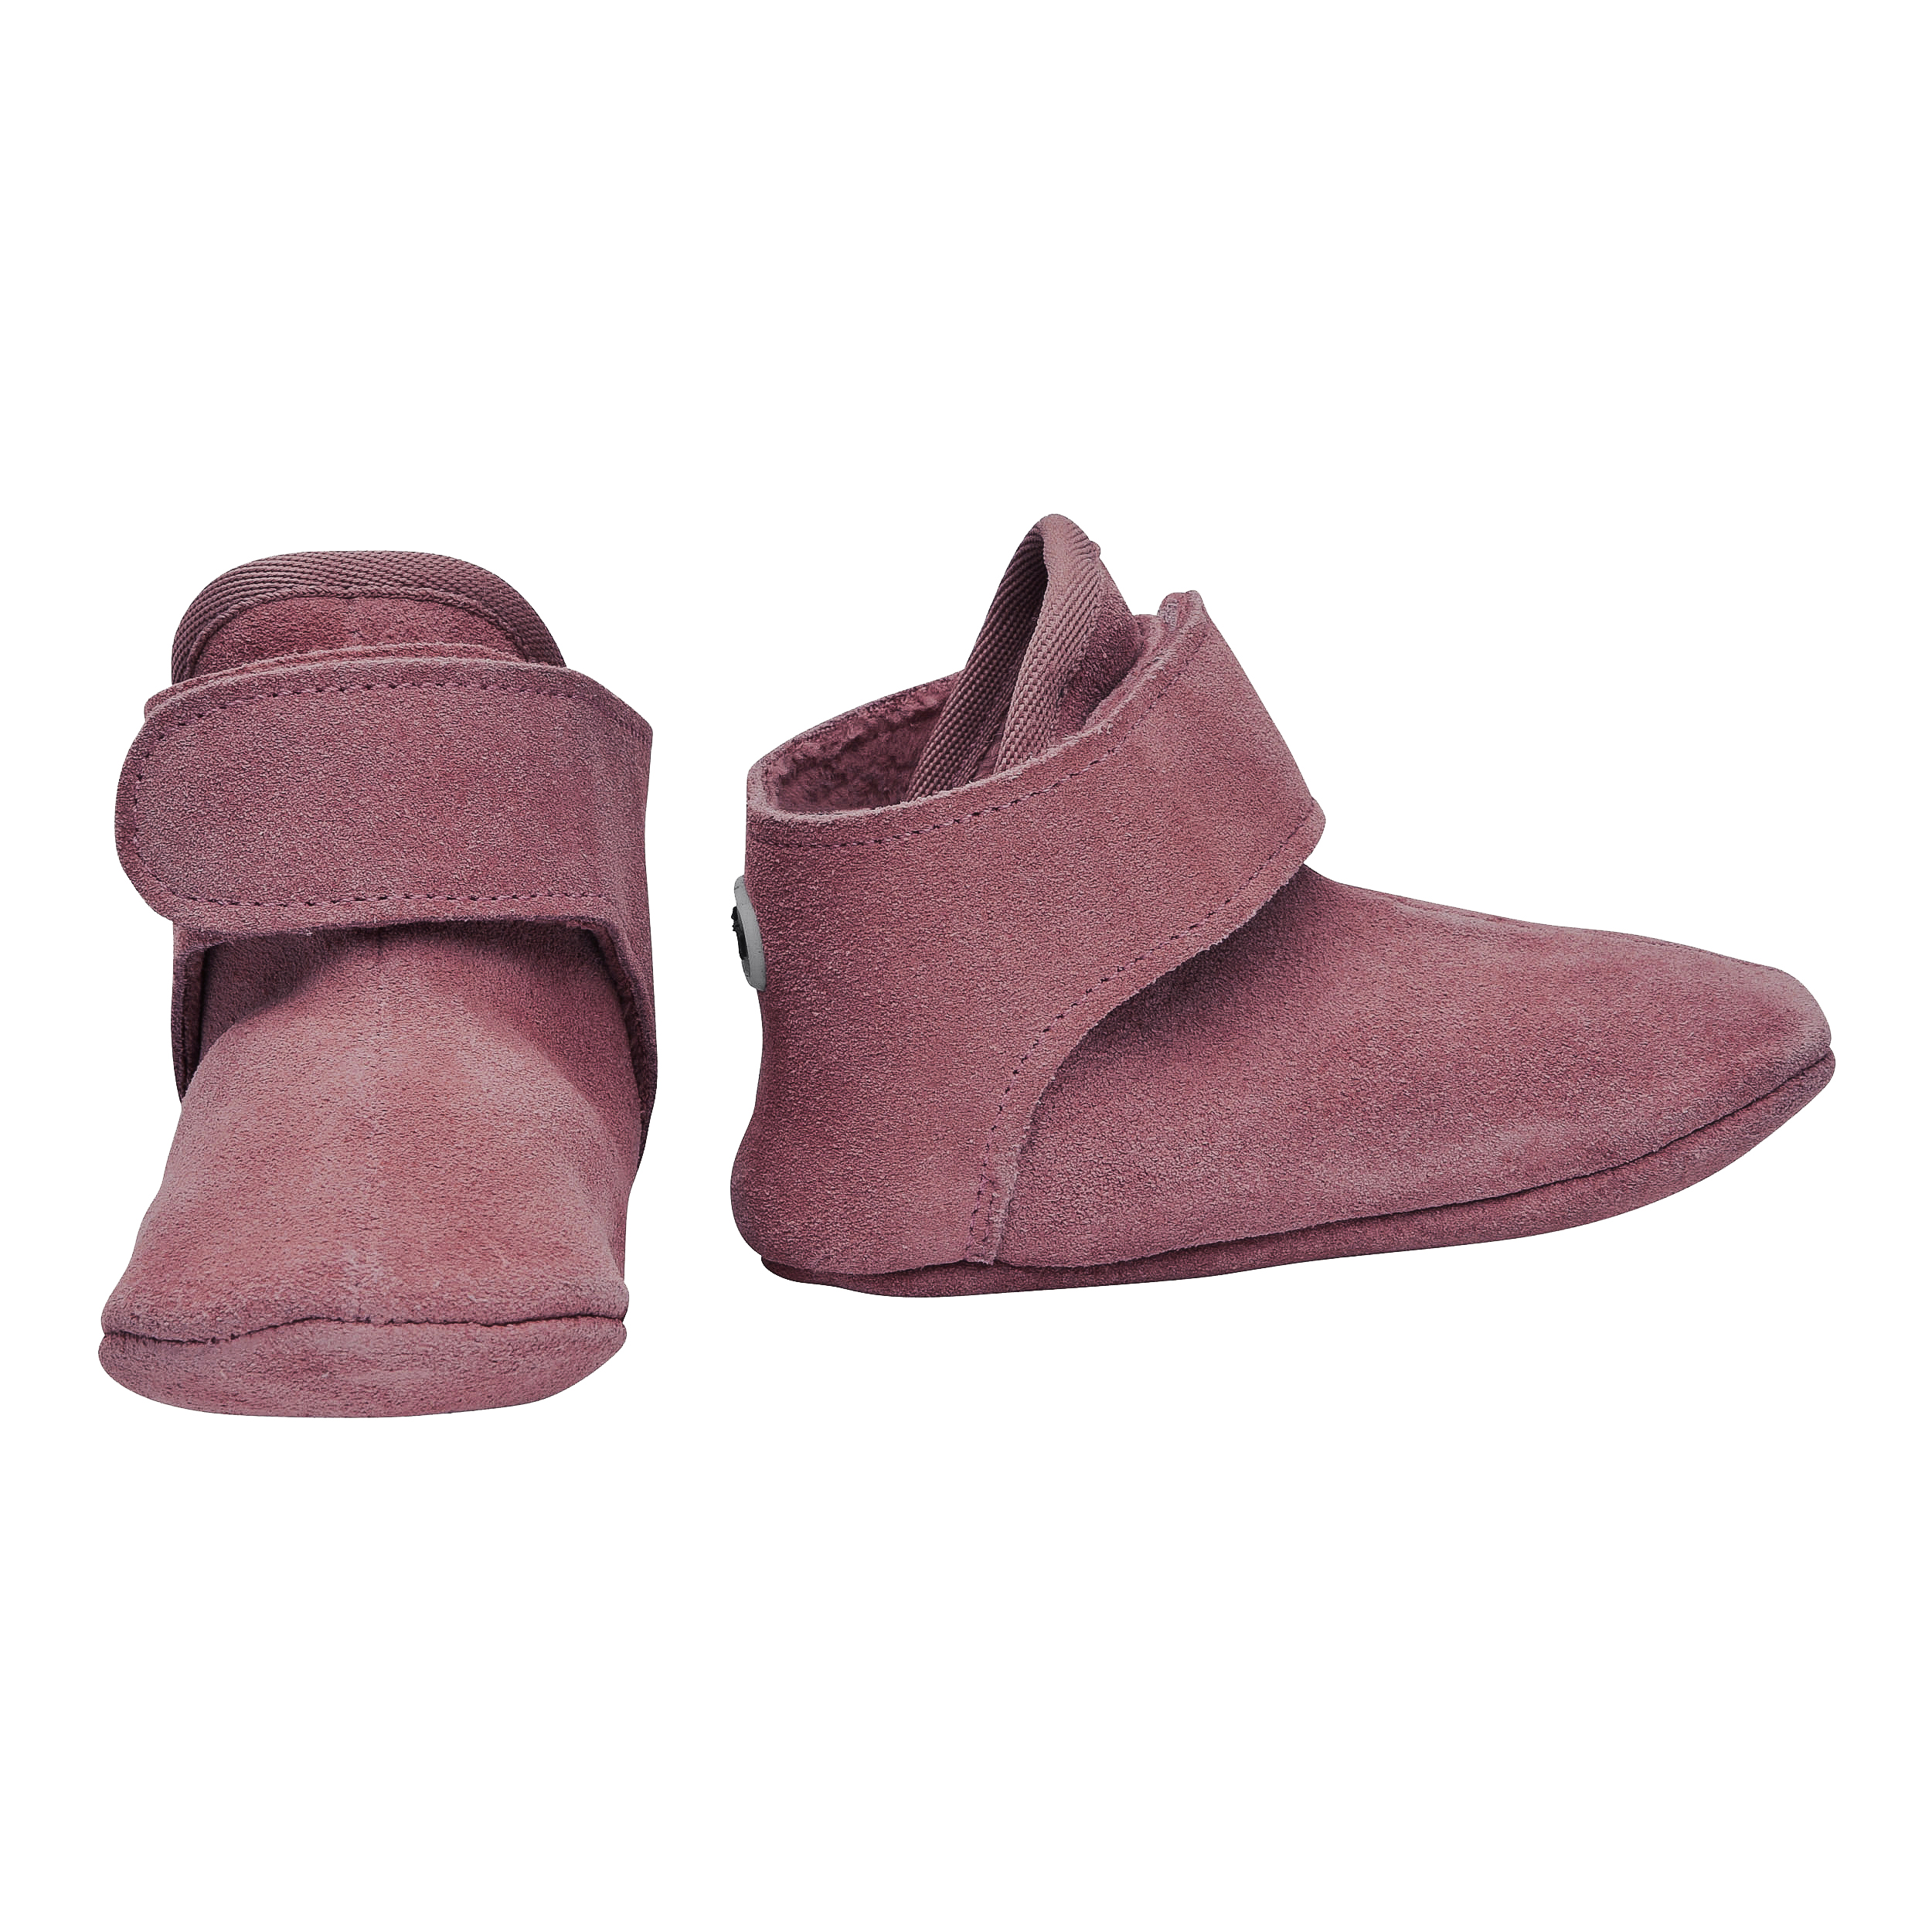 importeren Intentie beet Lodger leather baby booties with grip soles for 3-18 months